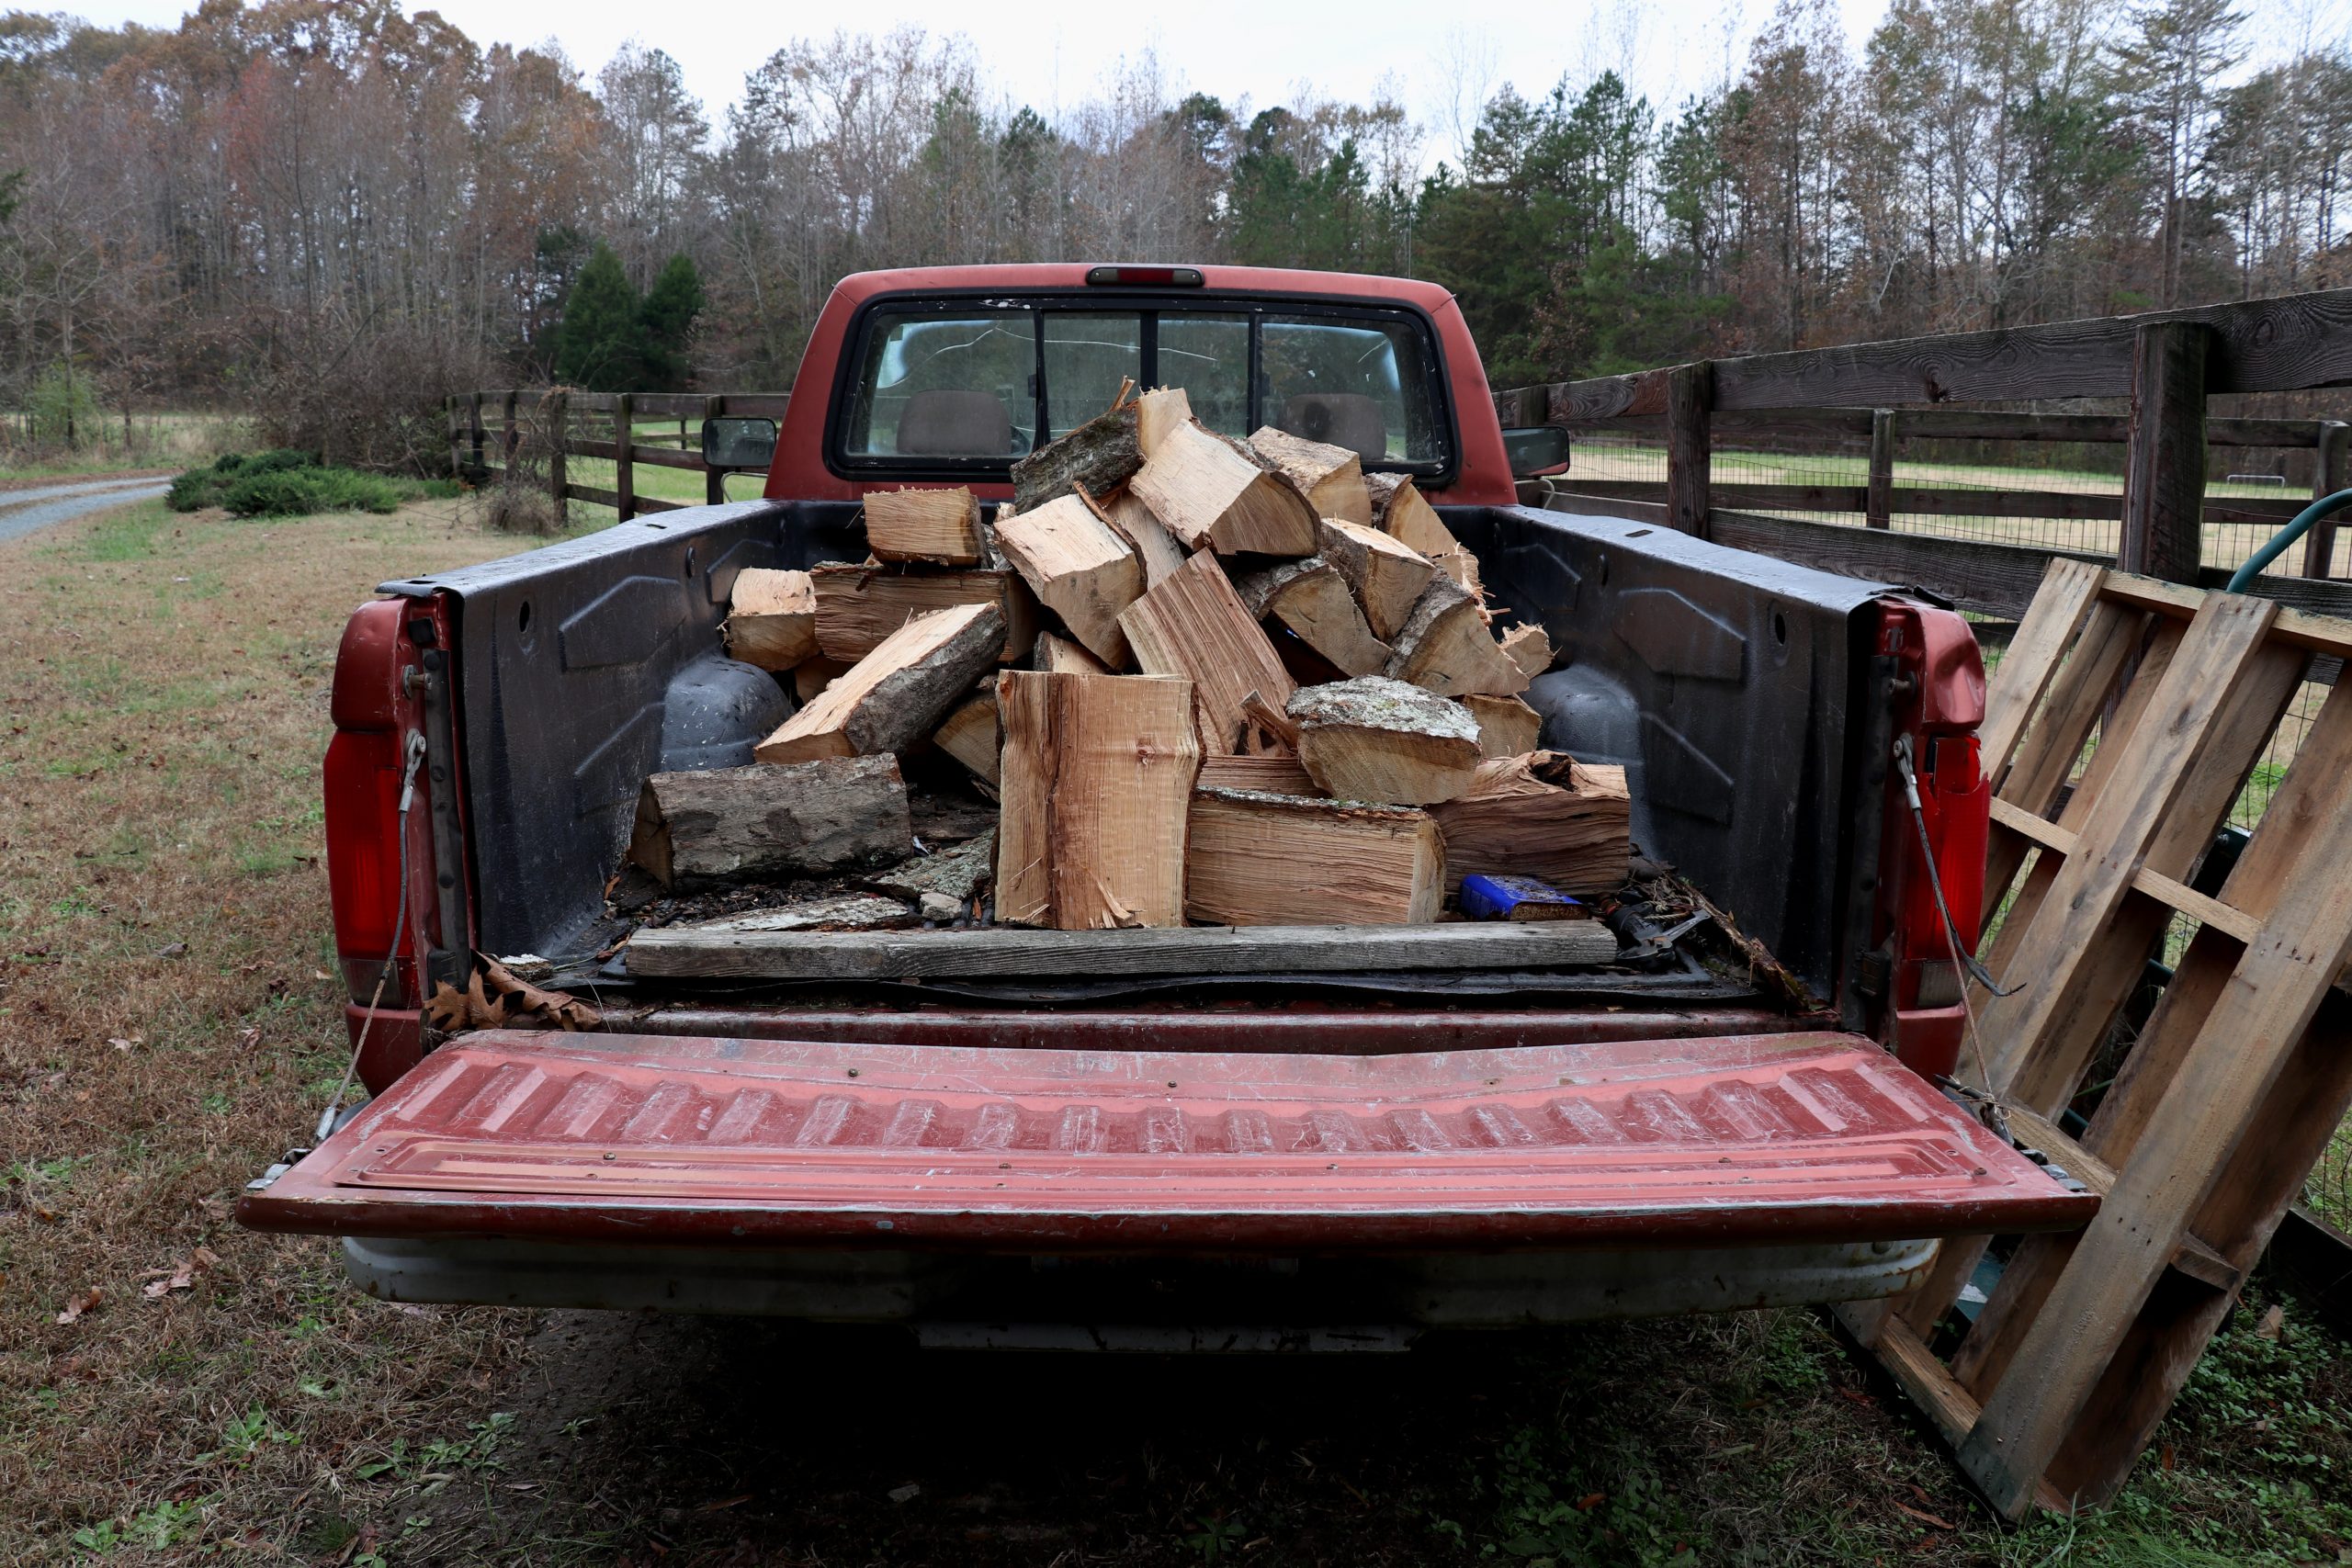 Red truck with firewood in the back